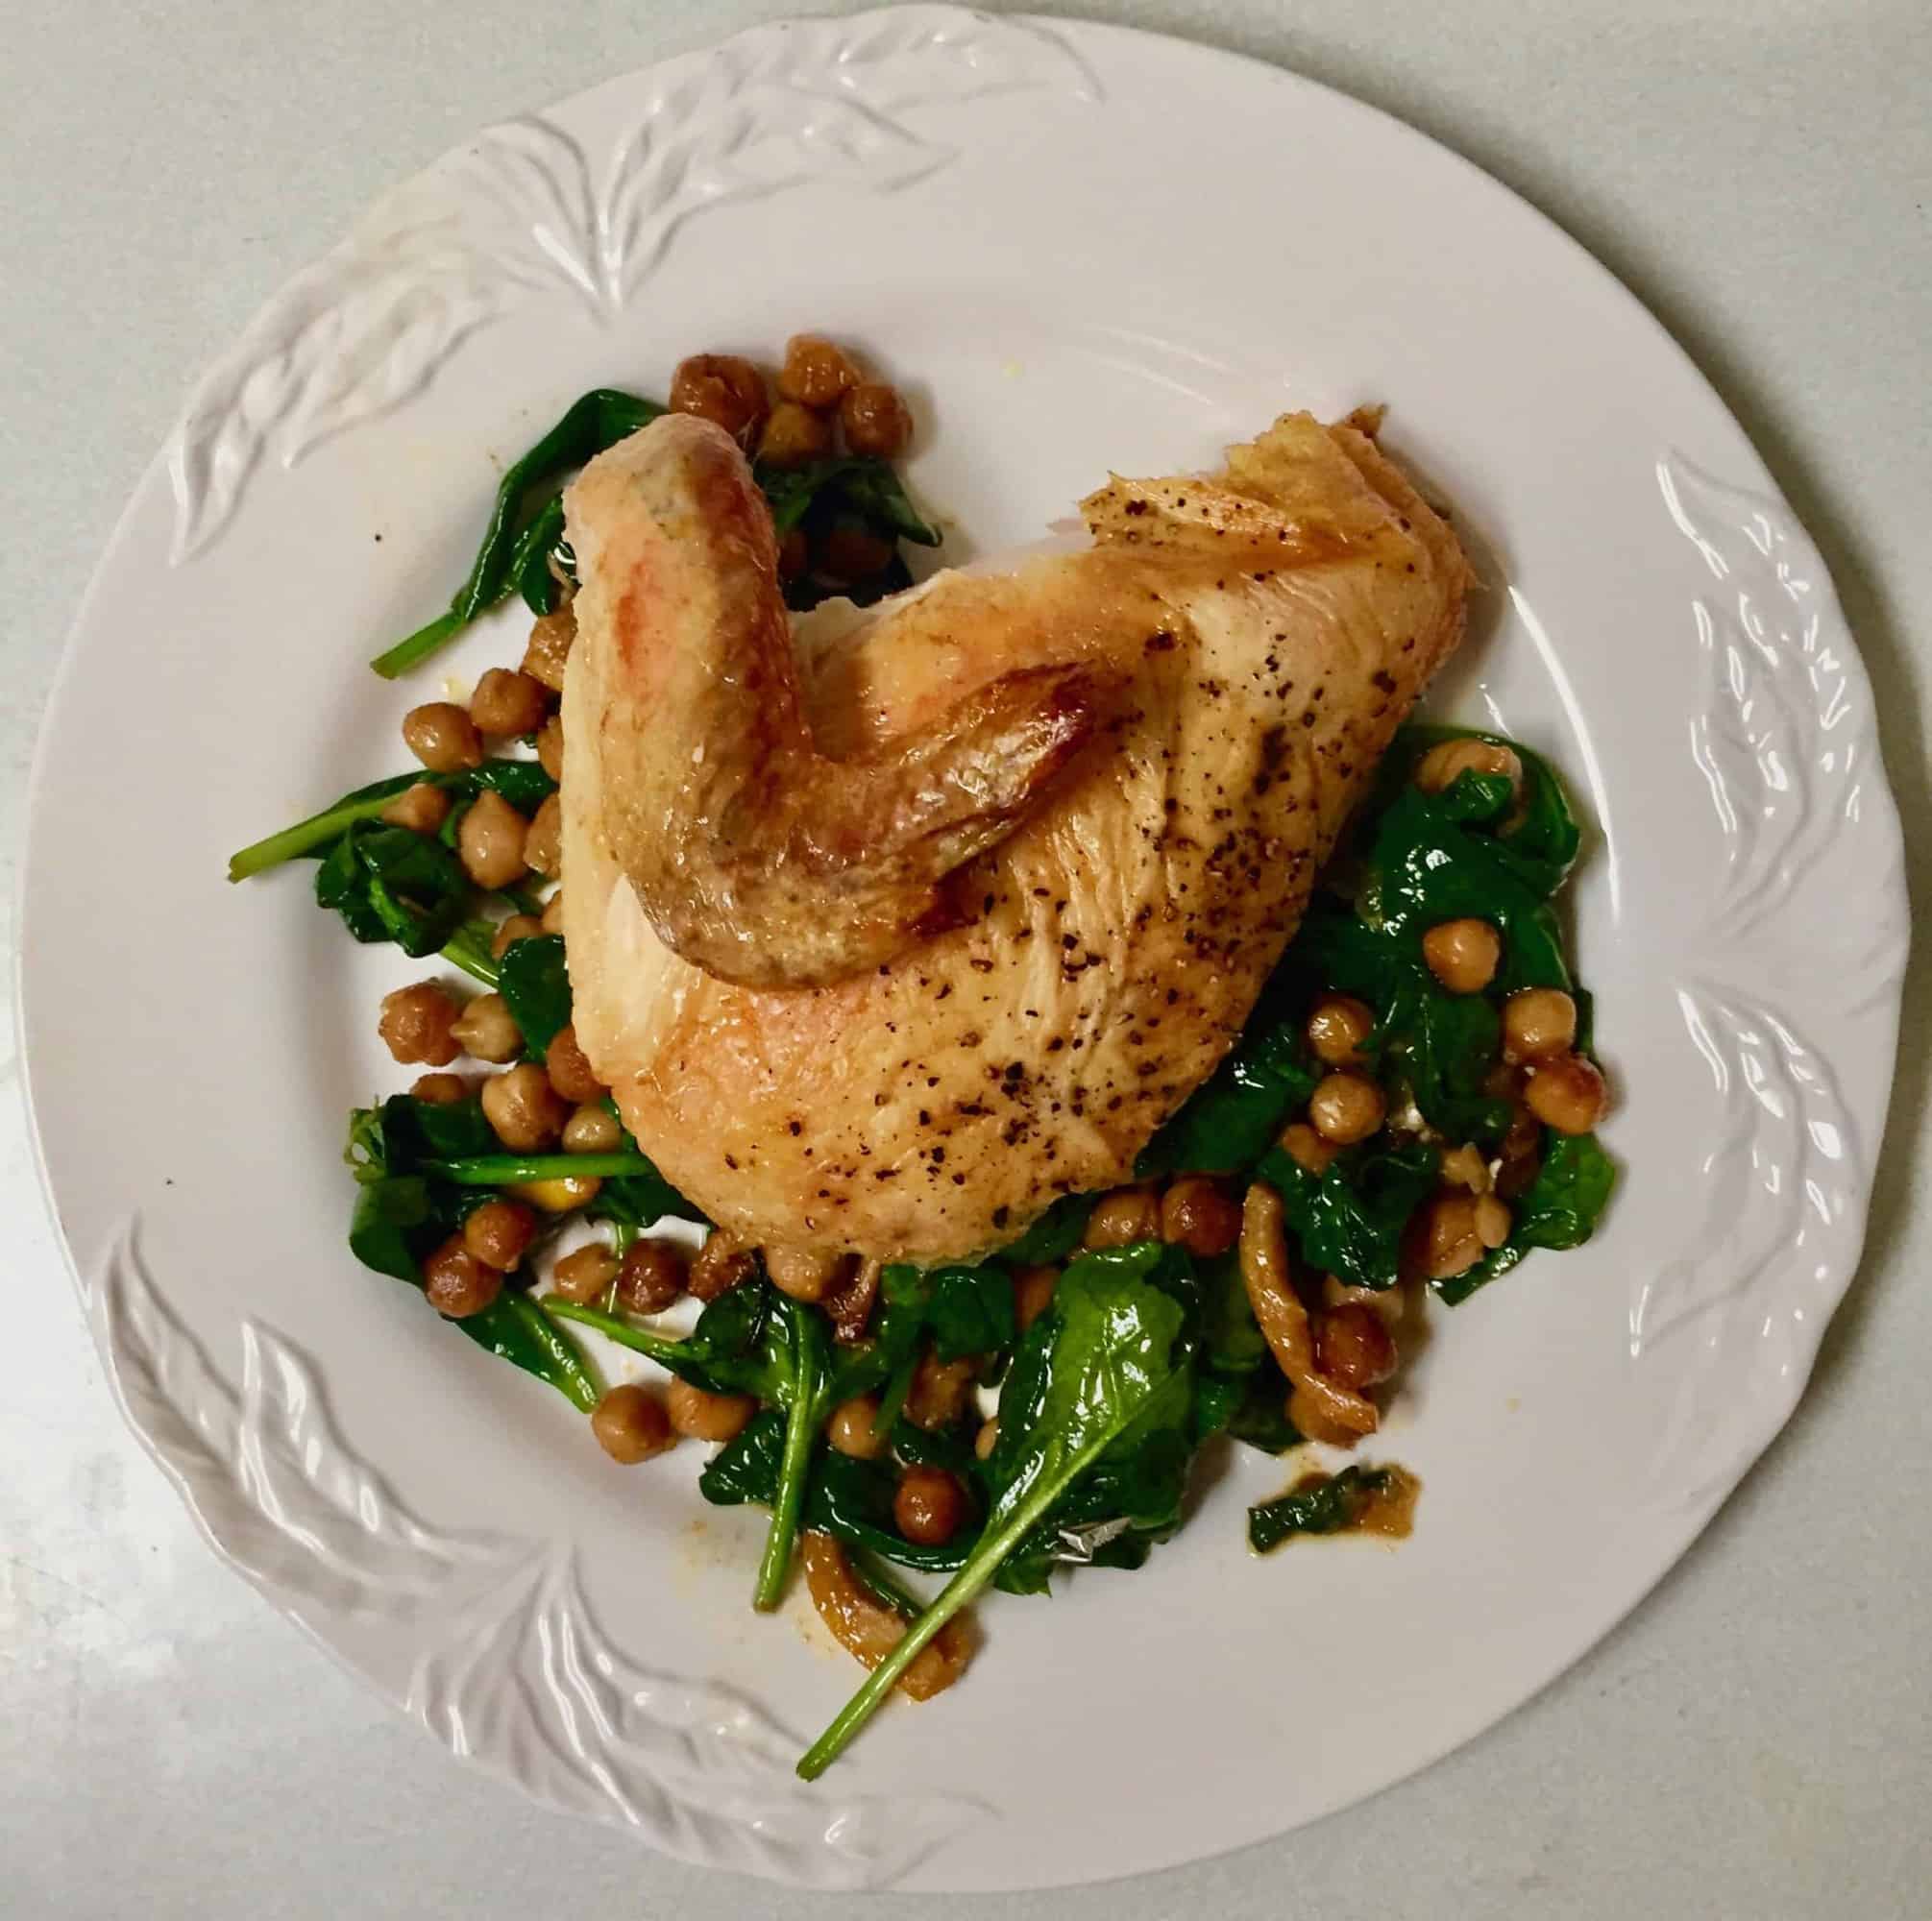 Roast Chicken on a Weeknight?  Yes!  Melissa Clark’s Smoky Paprika Chicken with Crispy Chickpeas, Roasted Lemon and Baby Spinach